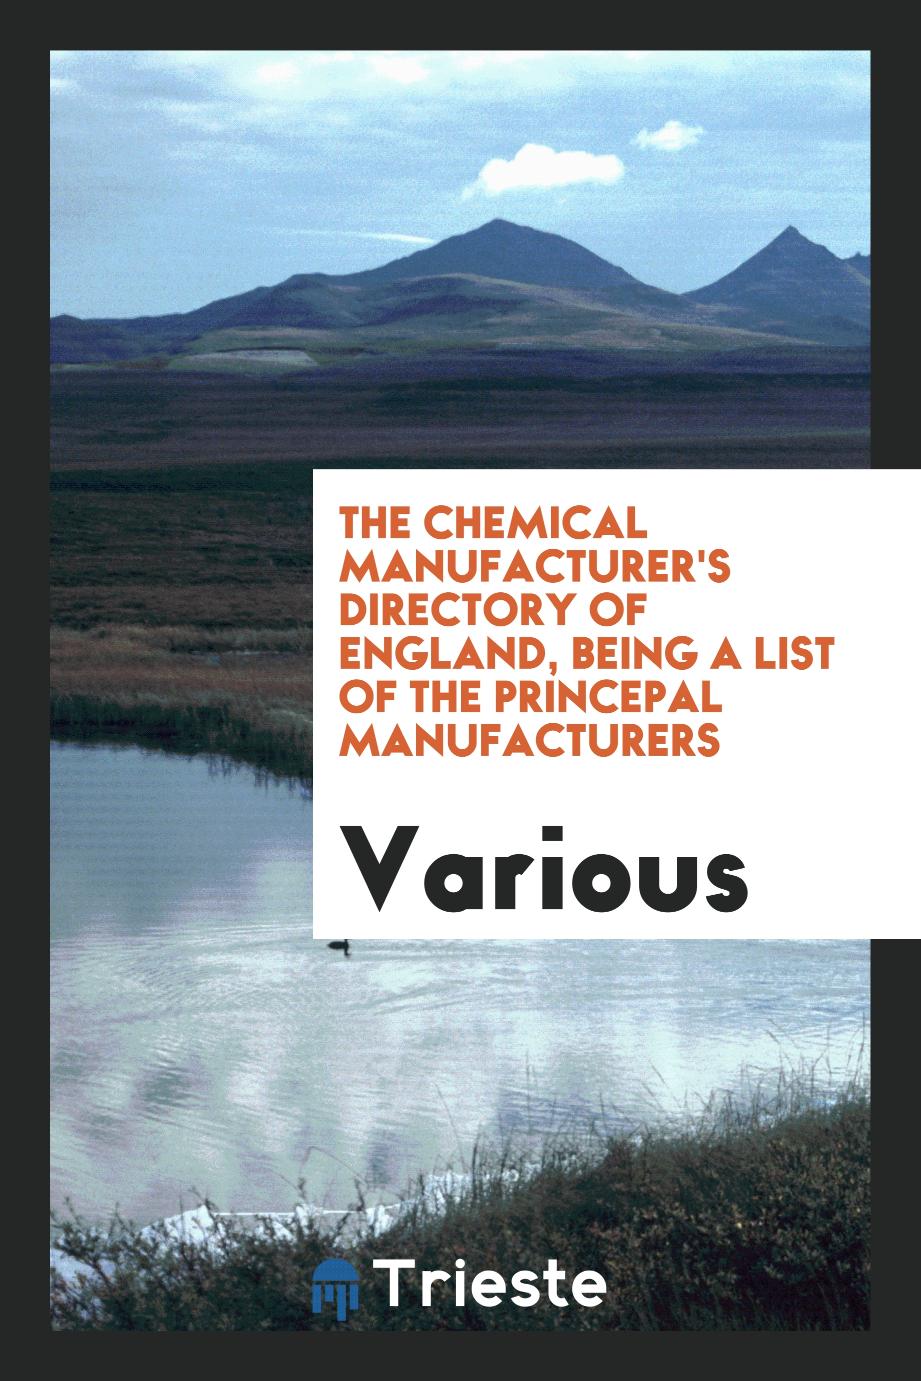 The chemical manufacturer's directory of England, being a list of the princepal manufacturers